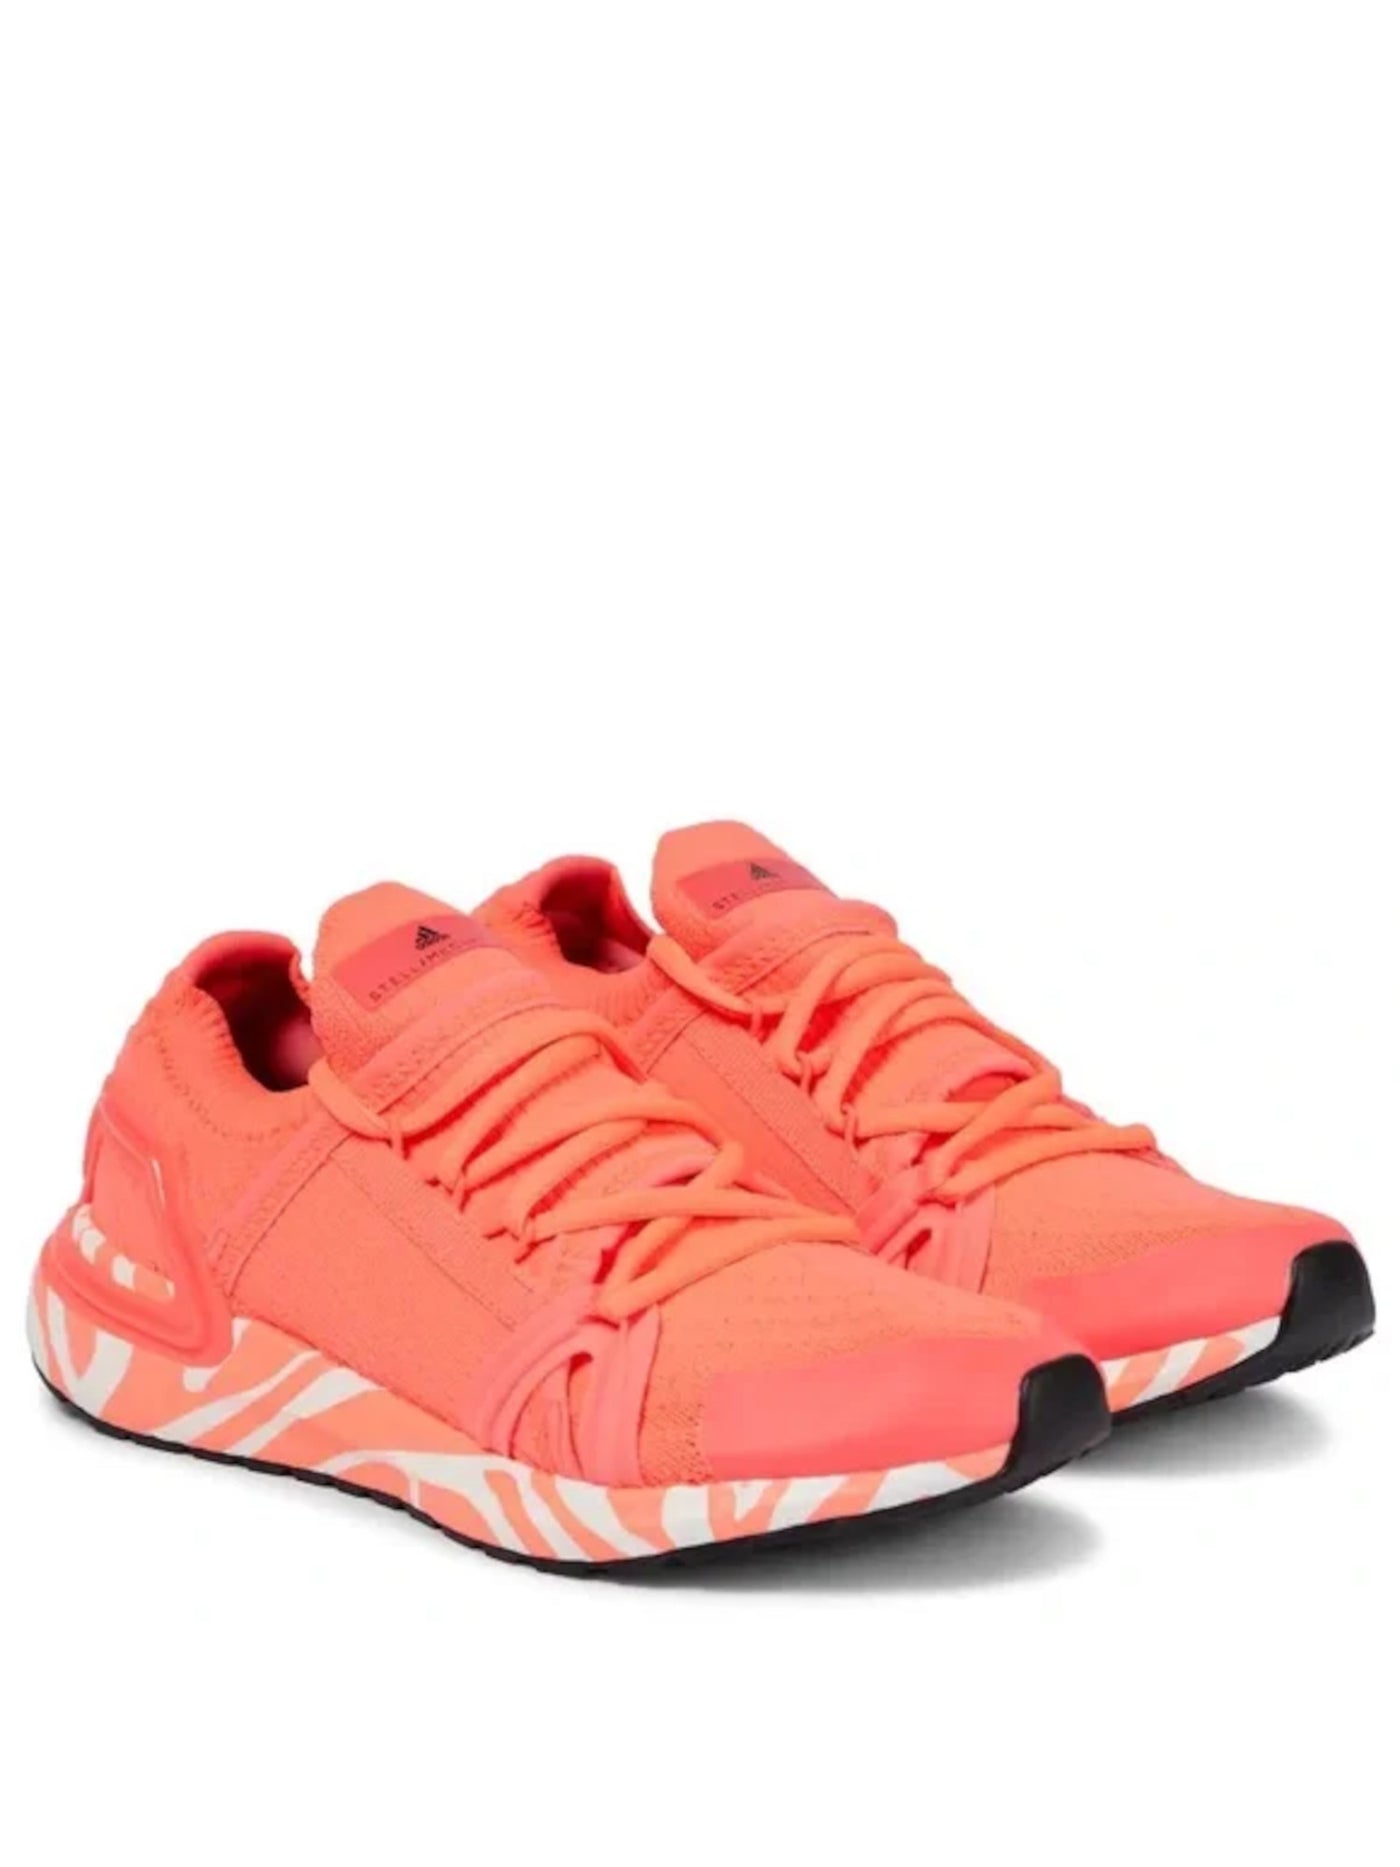 ADIDAS Womens Orange Stretch Removable Insole Comfort Stella Mccartney Asmc Ultraboost Round Toe Wedge Lace-Up Athletic Sneakers Shoes 5.5